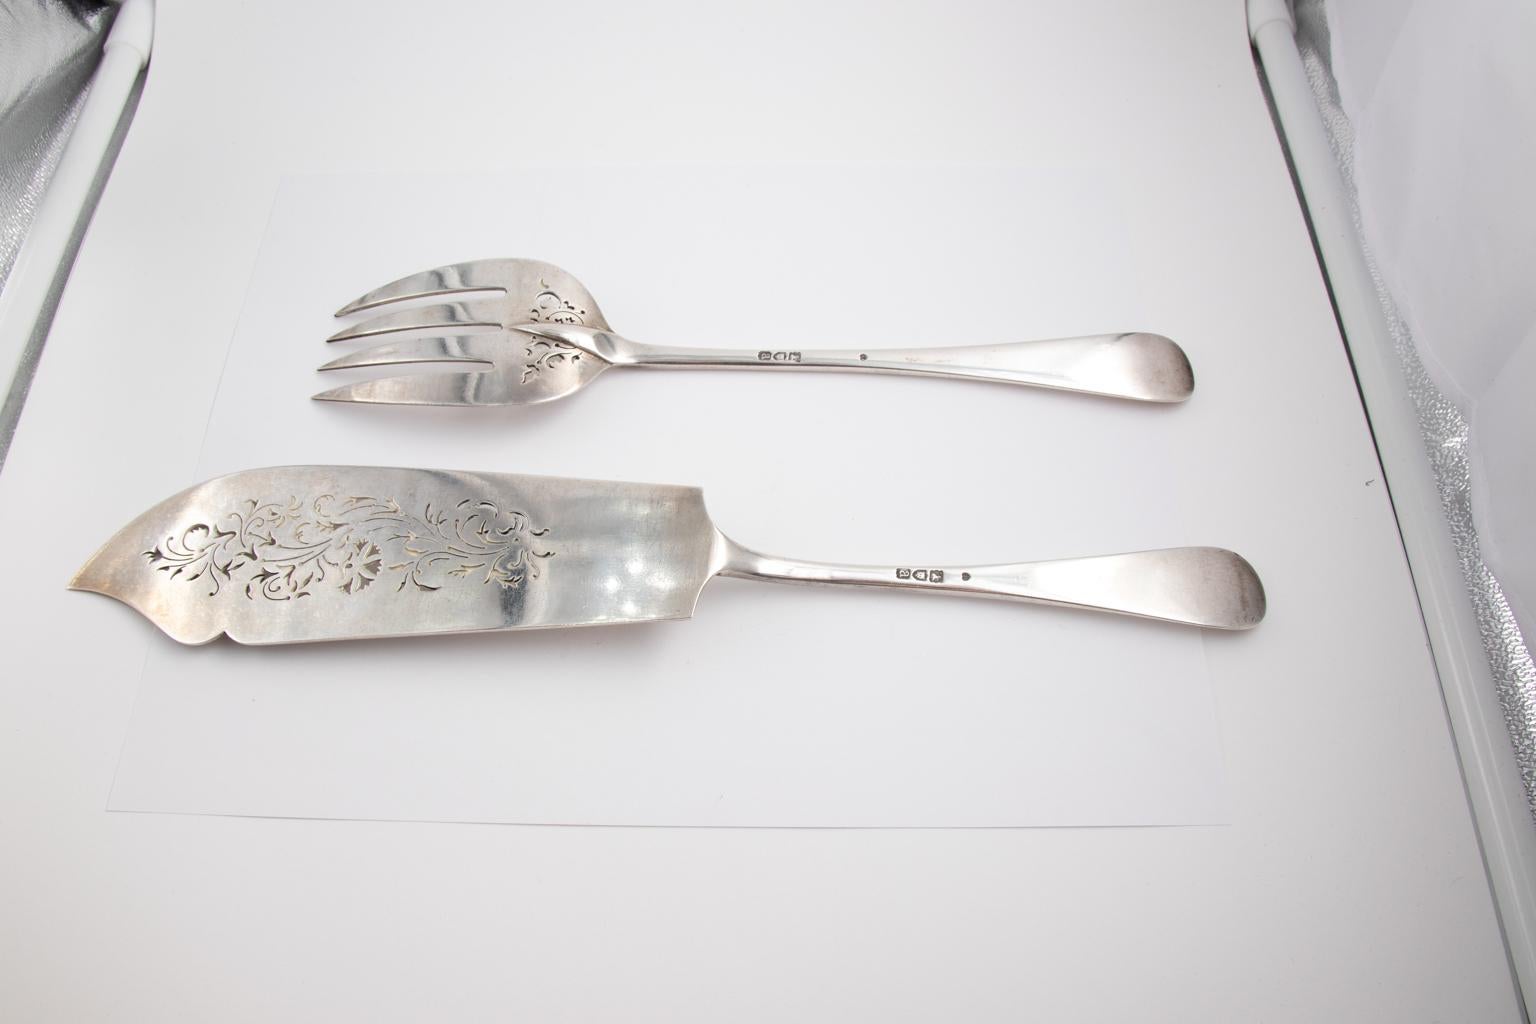 London Francis Higgins III two piece dish set with a matching knife and fork featuring etched floral designs, circa 1896. The knife measures 13.00 inches height and 2.50 inches wide; the fork measures 10.50 inches height by 2.25 inches wide. The